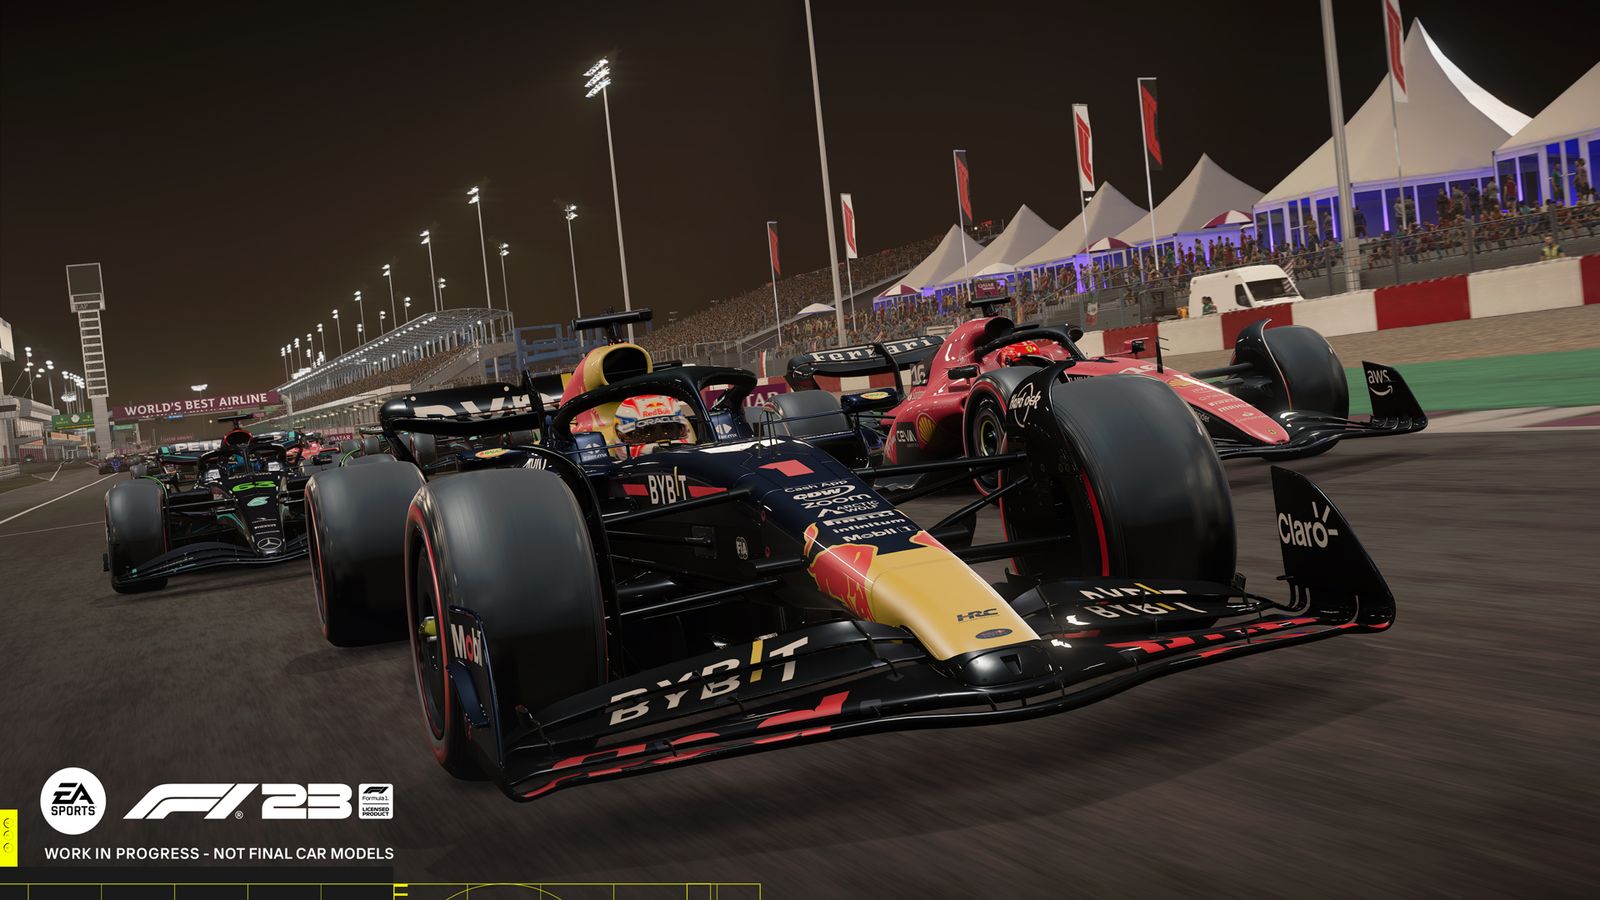 Racing at Qatar, a new track for F1 23